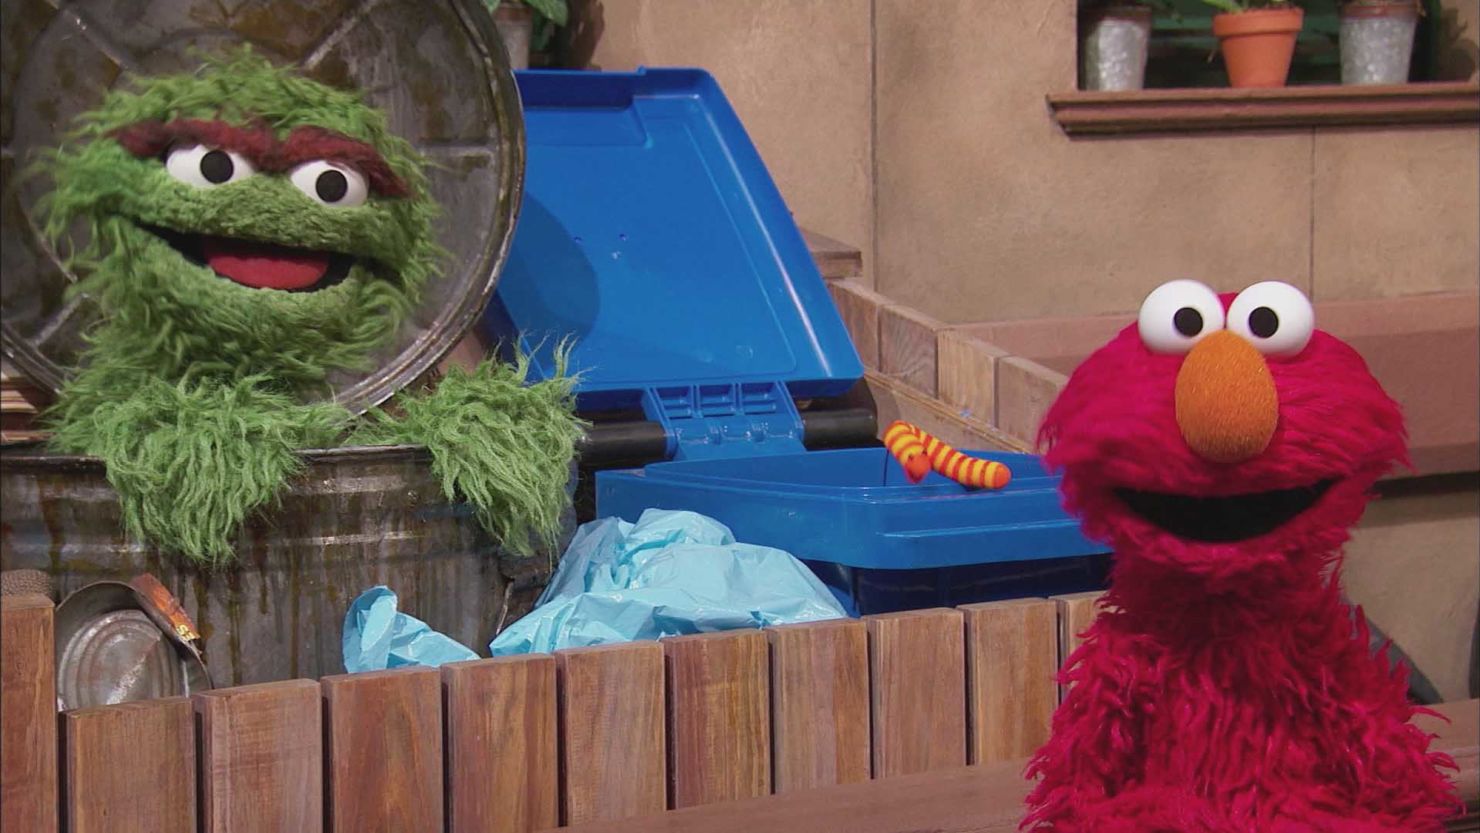 'Sesame Street' is available on PBS and HBO